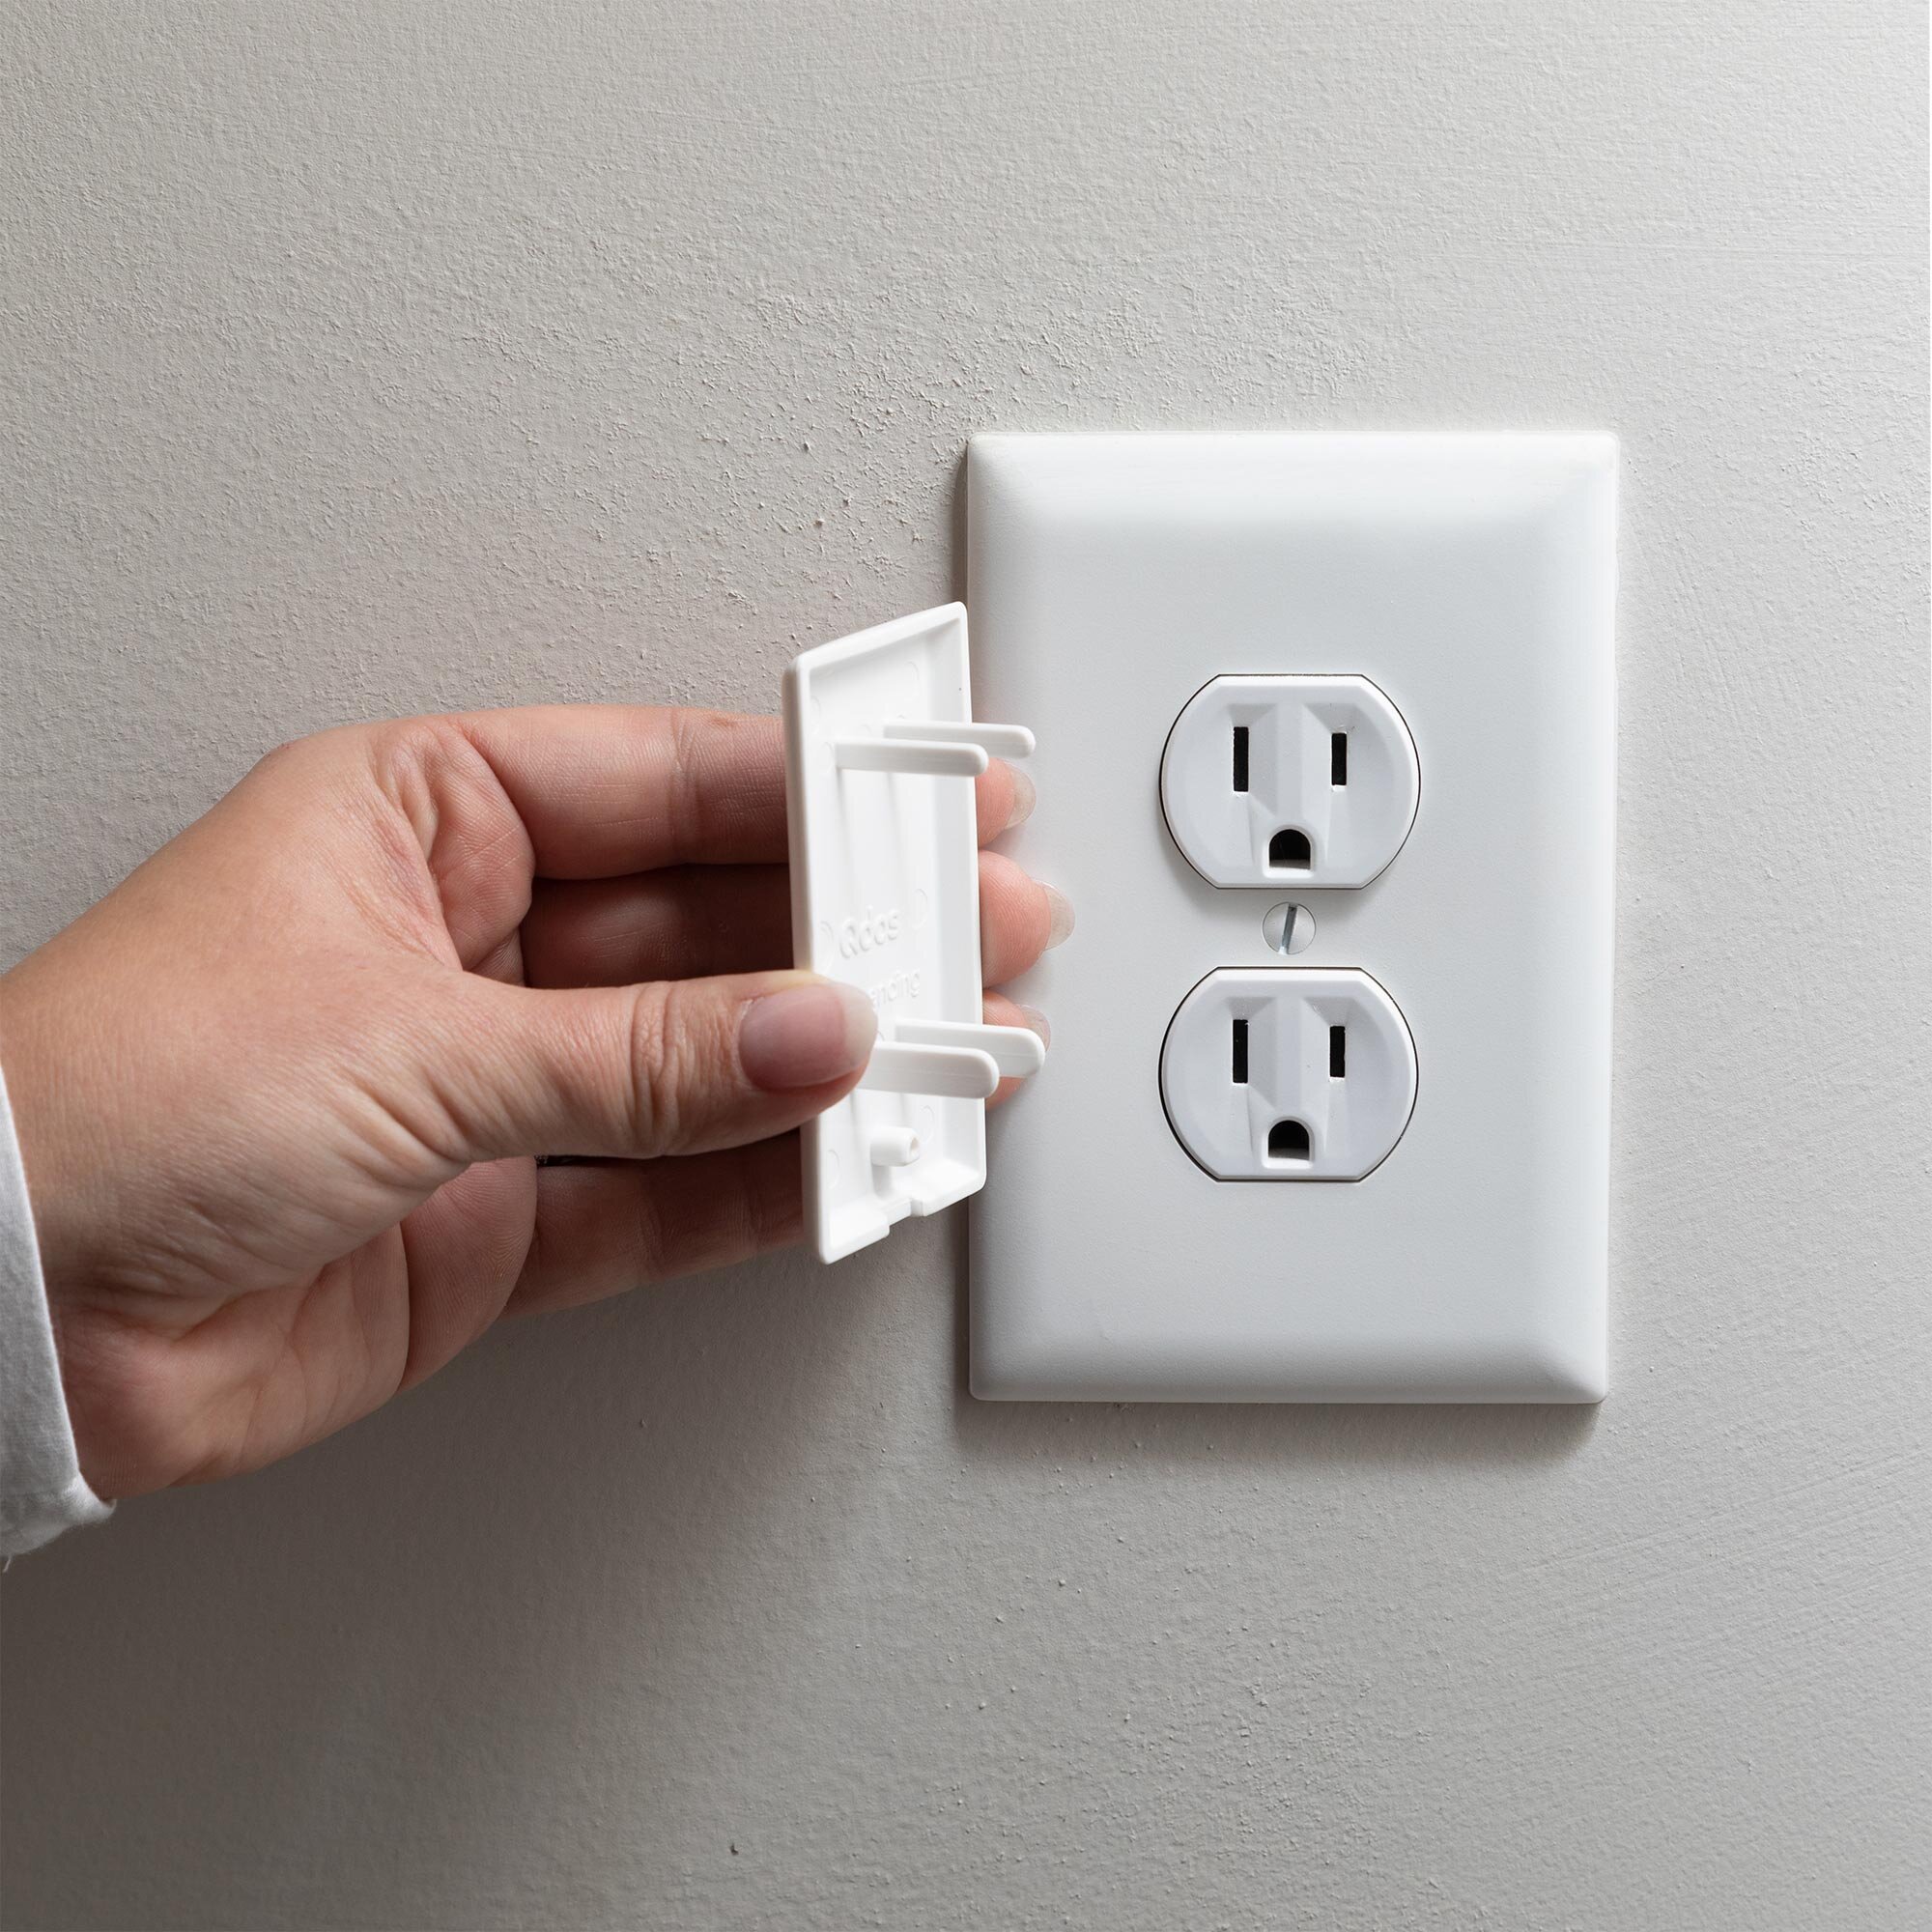 Installing StayPut® Double Outlet Plug